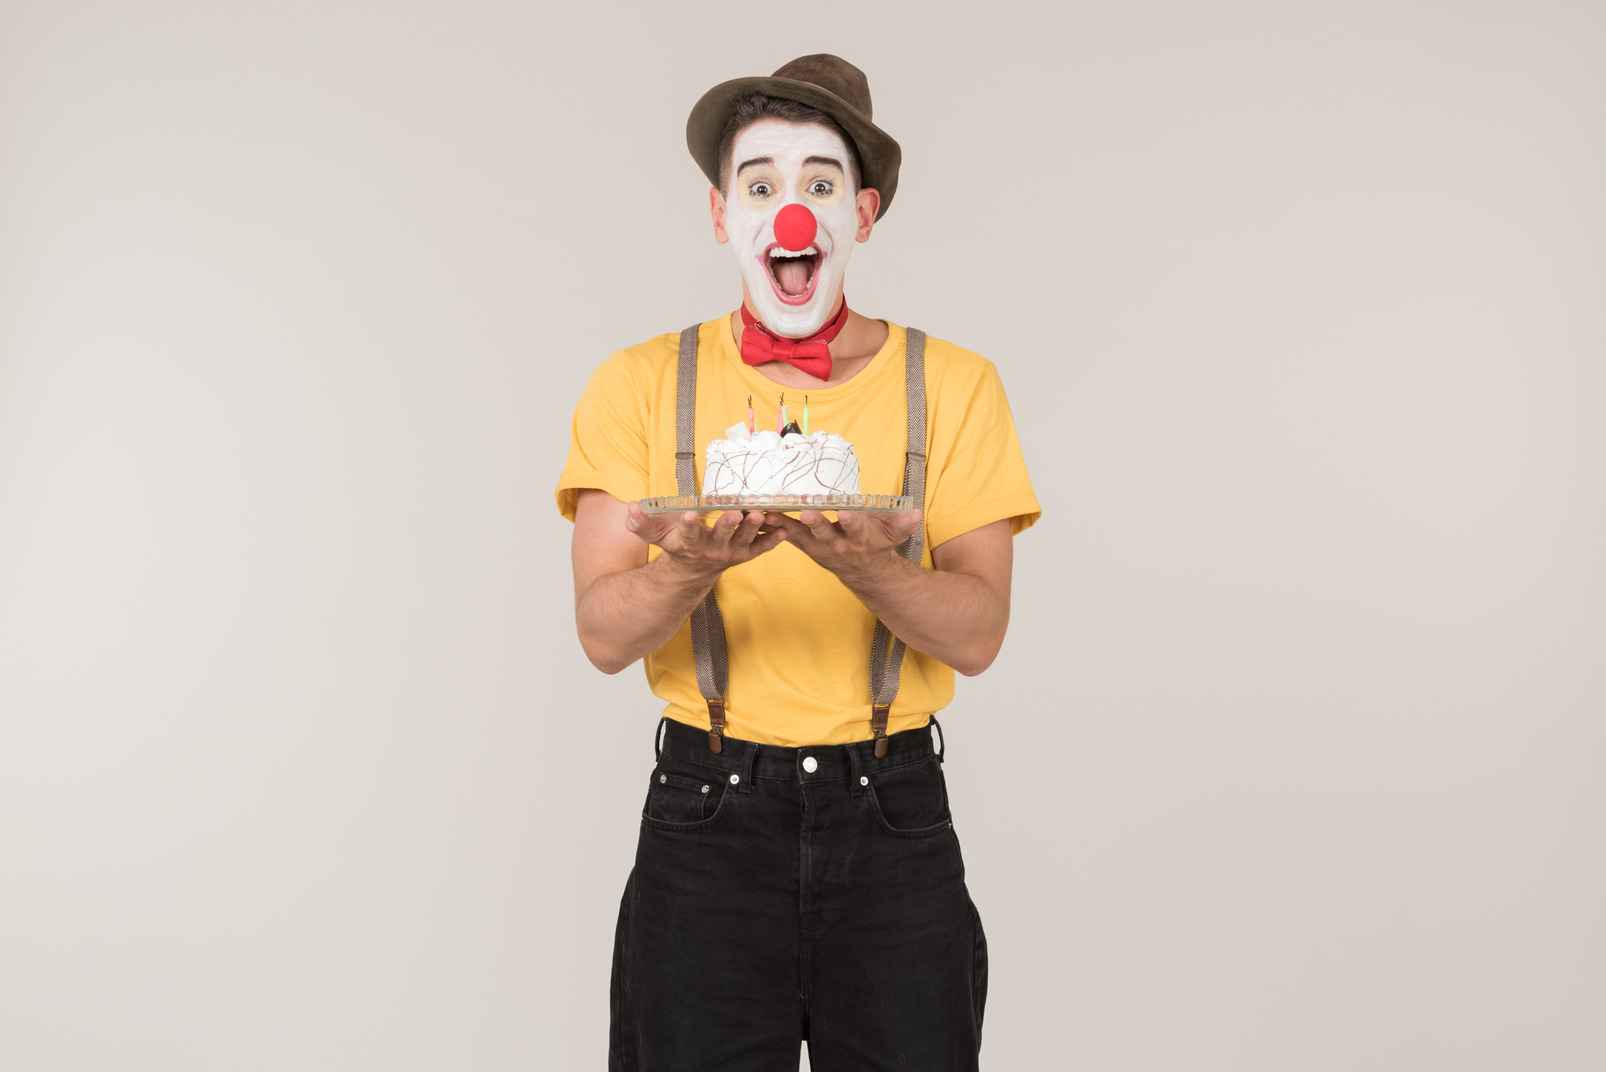 Excited male clown holding a cake